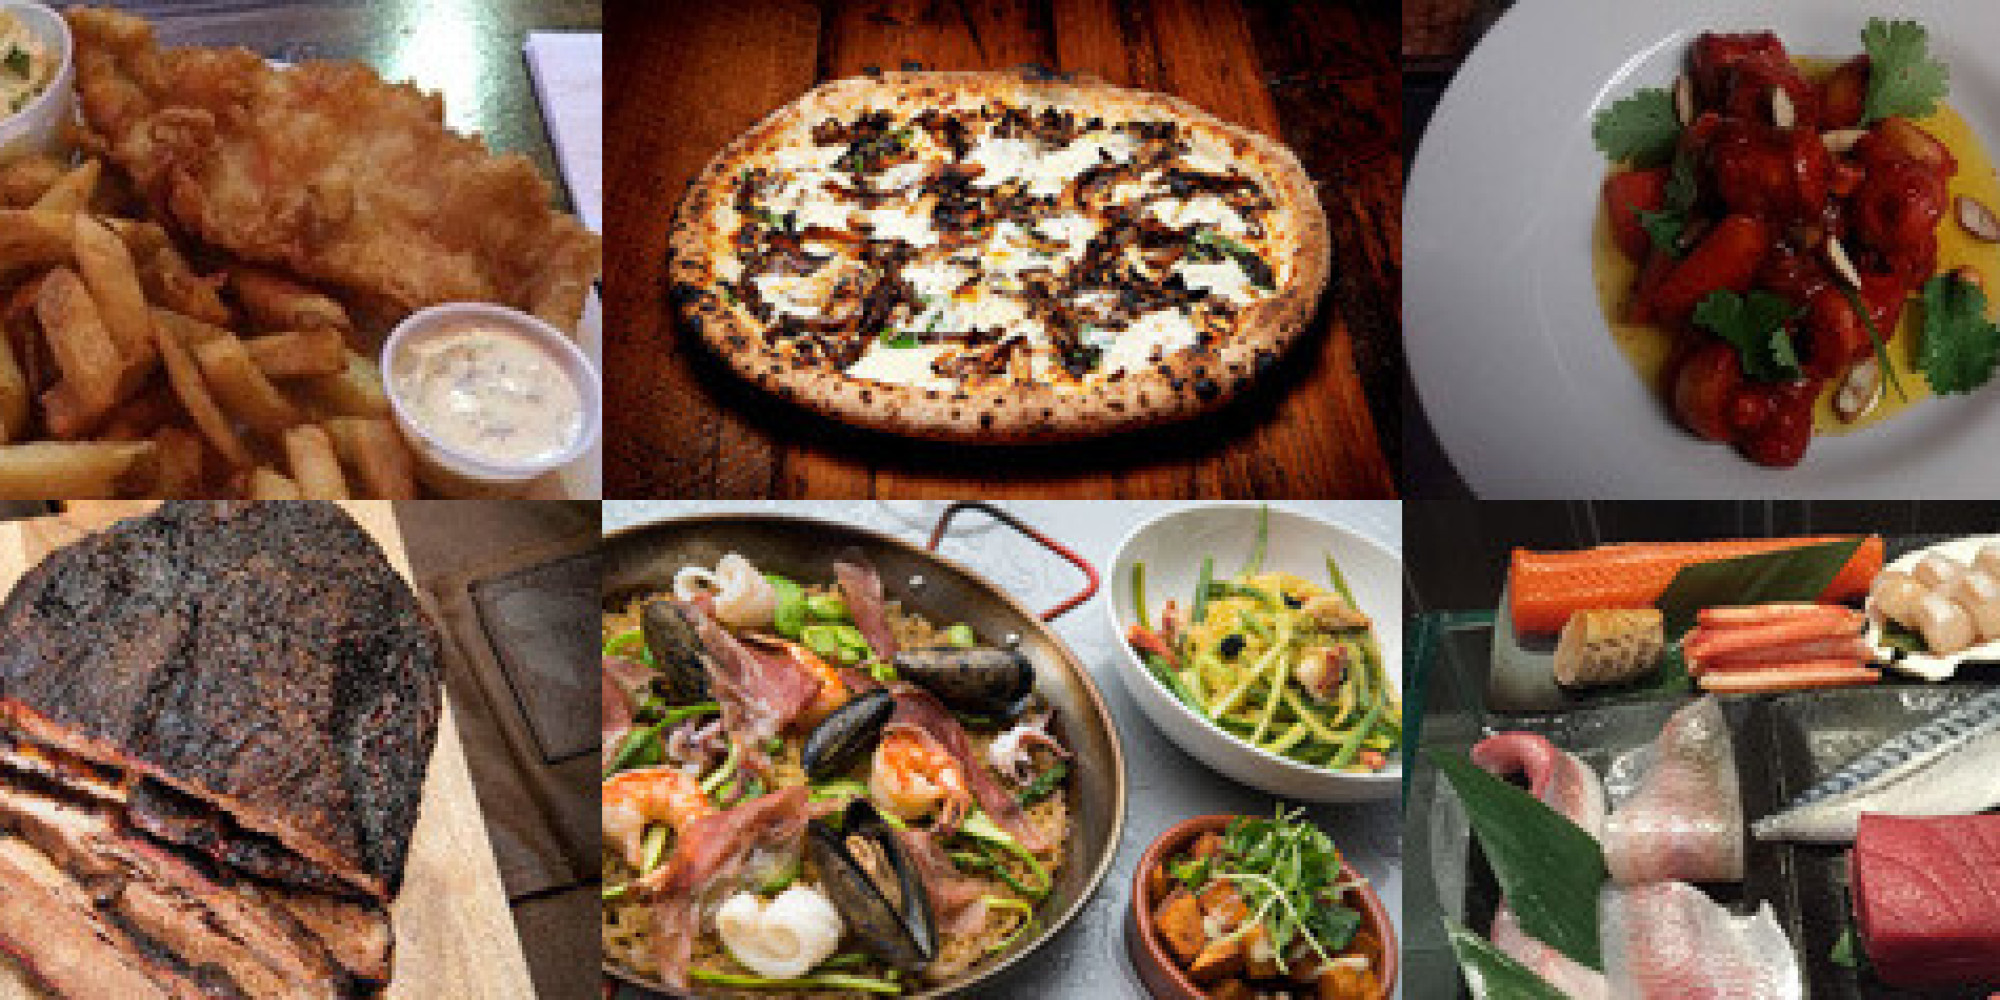 The Best Restaurants In Toronto For 2014 (To Try In 2015)